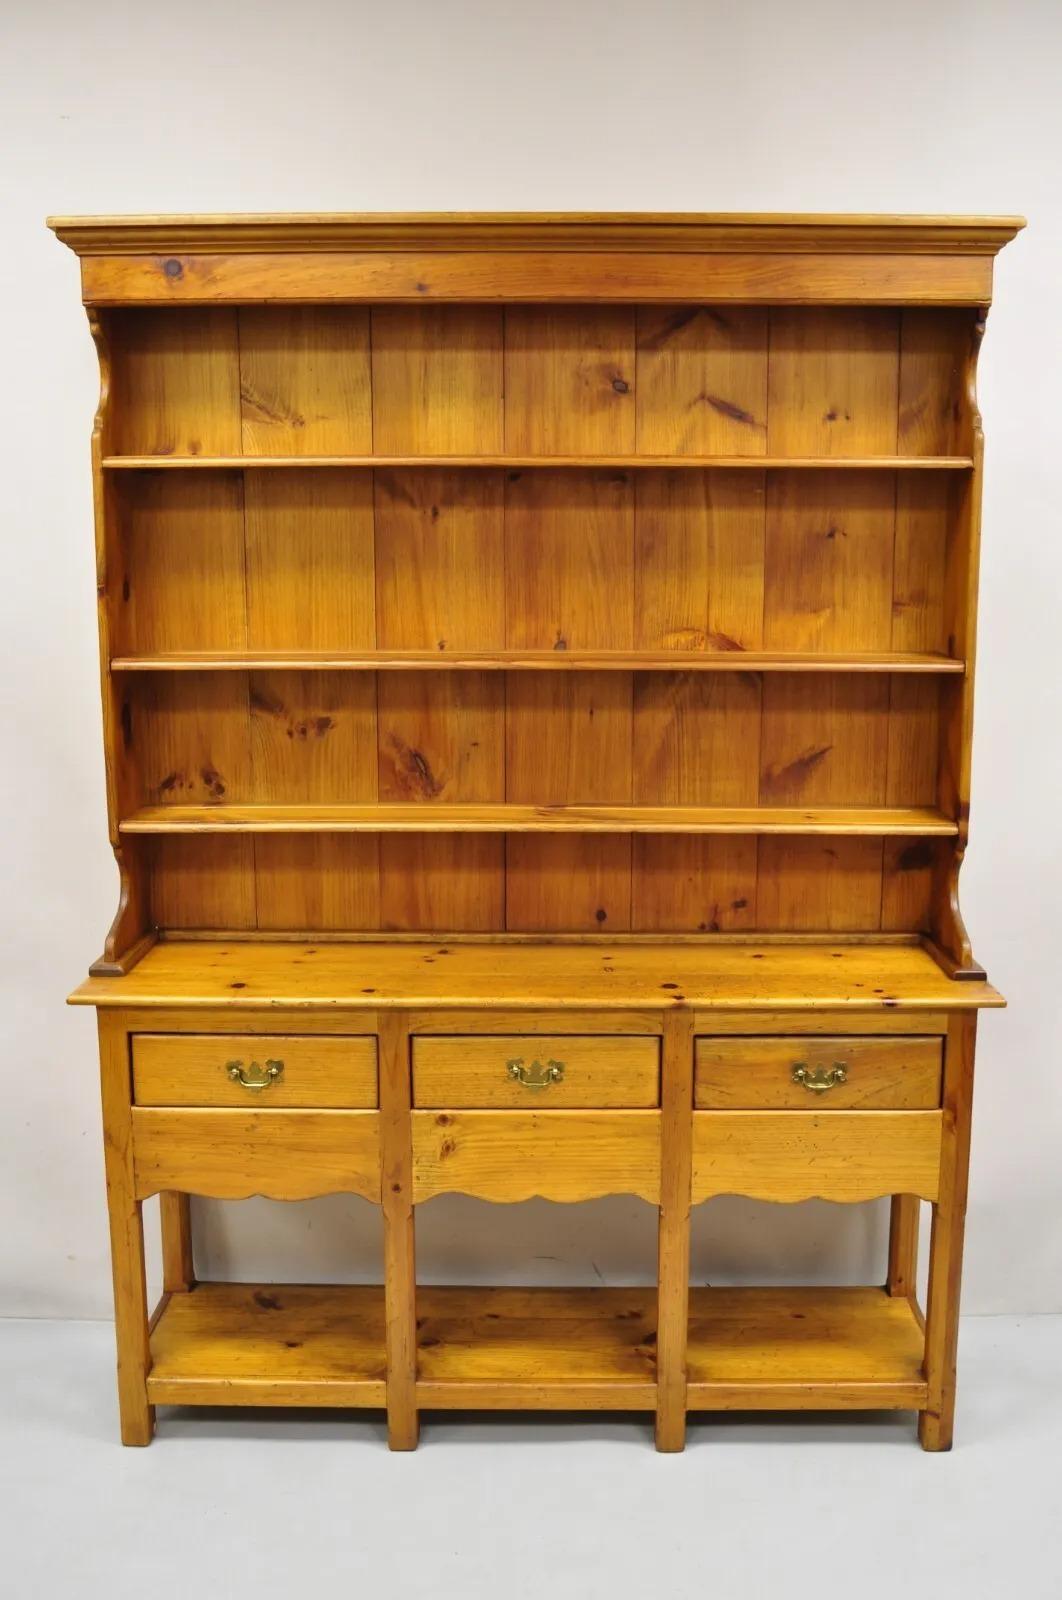 Borkholder Furniture Pine Wood Primitive Farmhouse Amish Open Hutch Cupboard. Item features 3 dovetailed drawers, solid knotty pine wood construction, brass hardware, beautiful wood grain, original makers tag, 2 part construction. Circa Late 20th